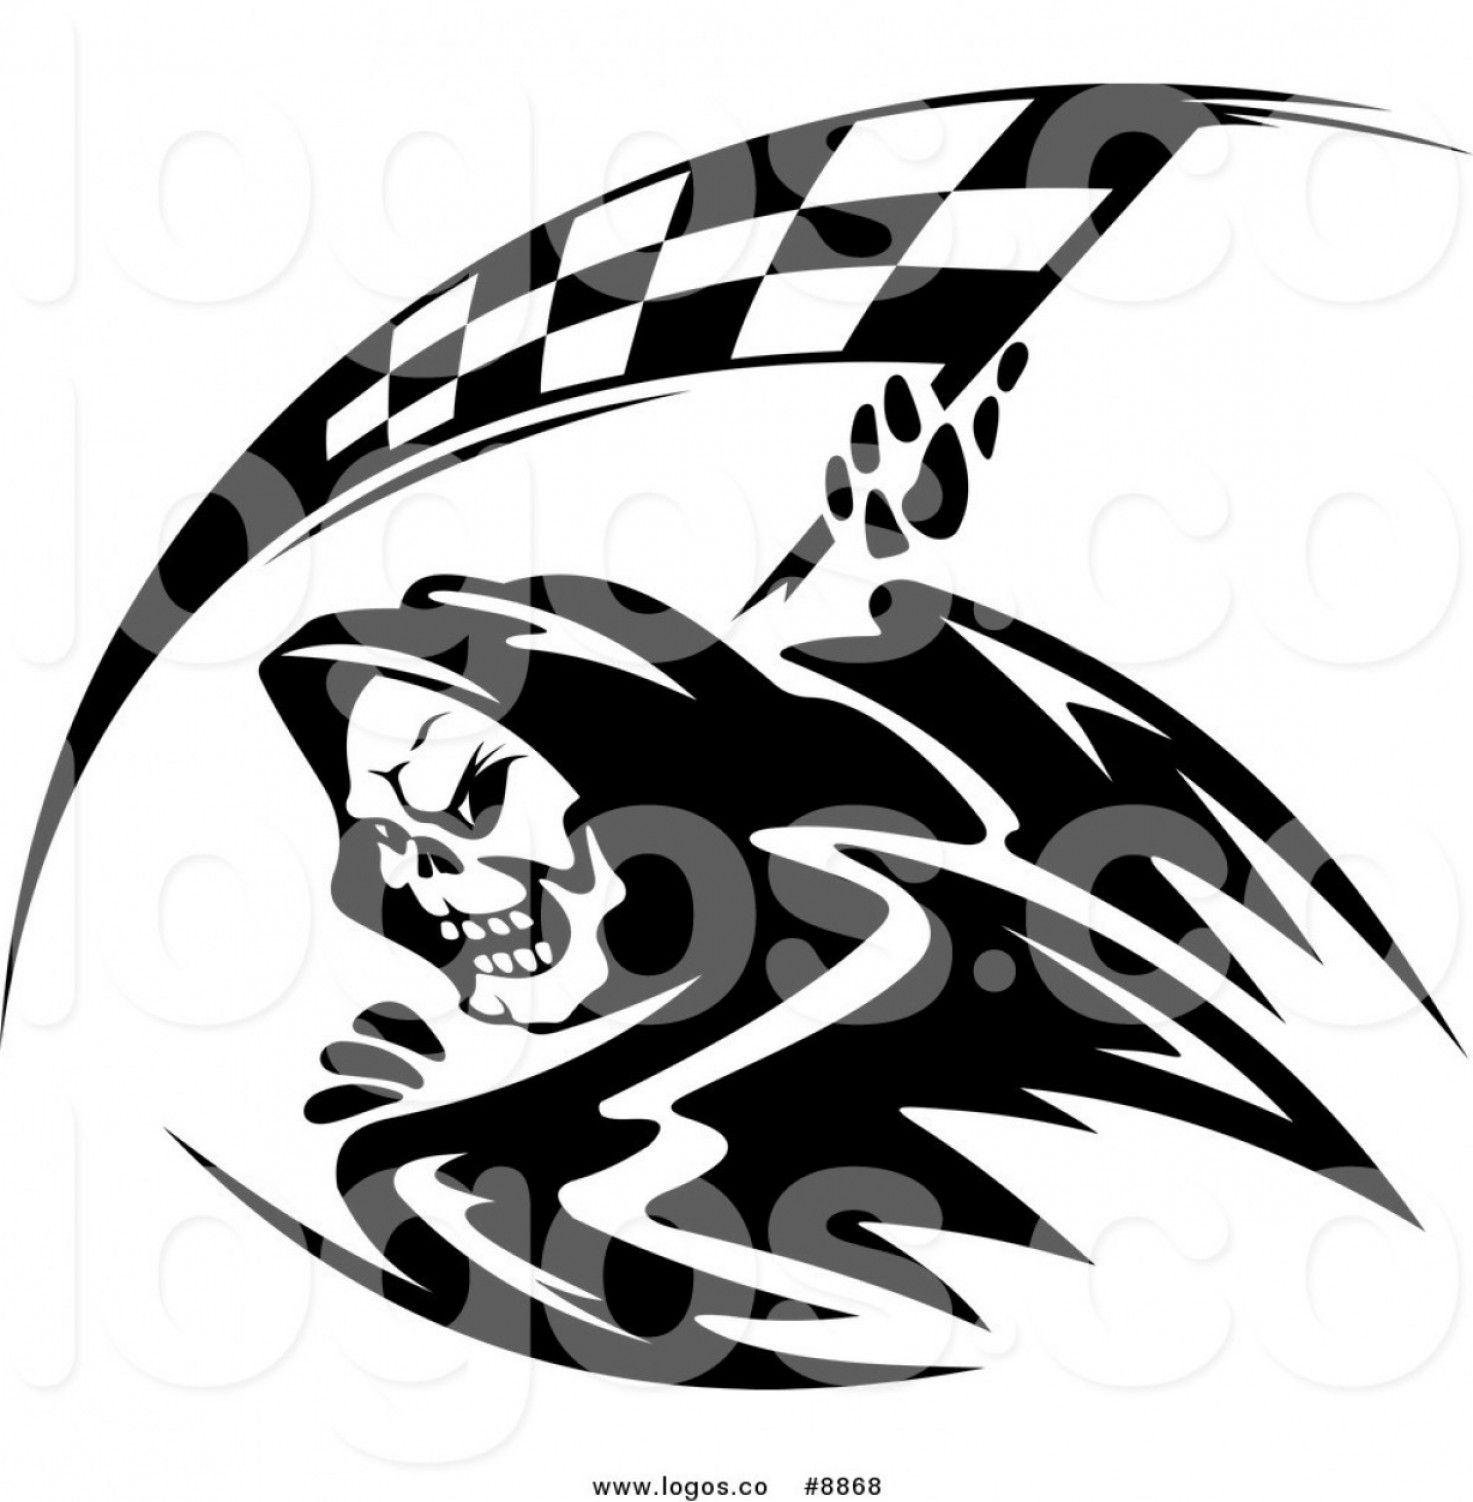 Black and White Checkered Logo - Royalty Free Clip Art Vector Logo Of A Grim Reaper With A Black